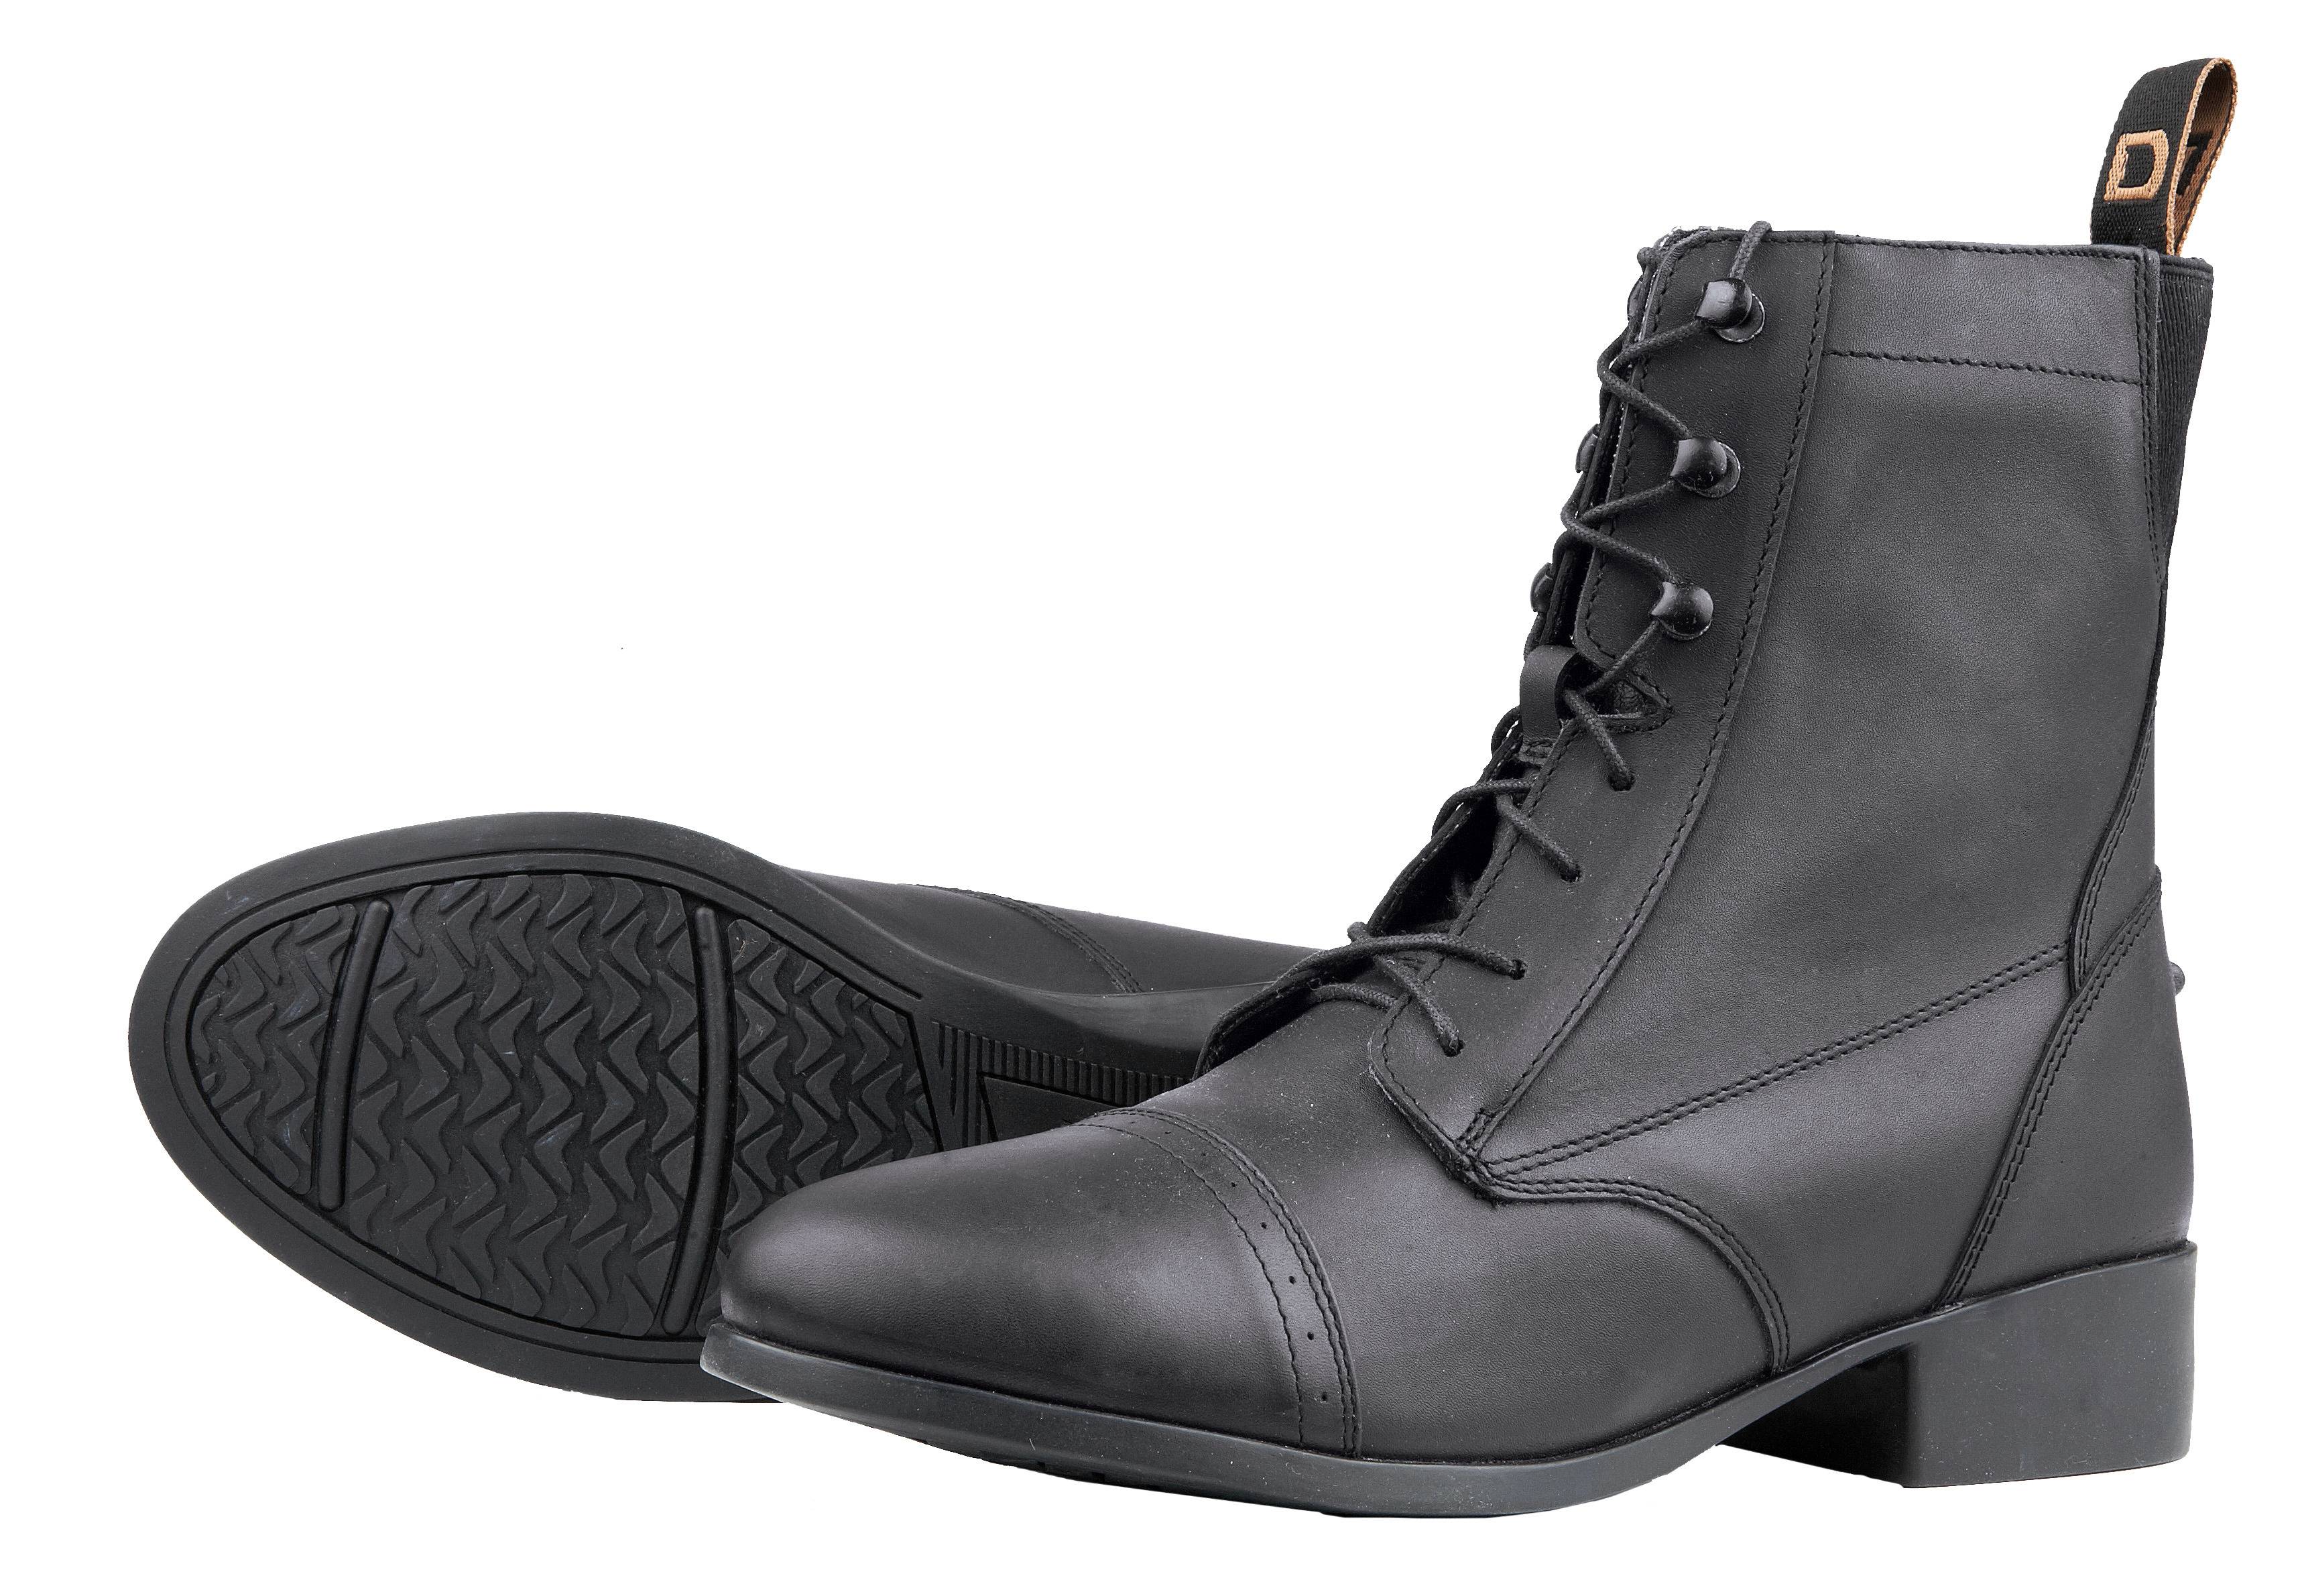 Dublin Elevation Laced Paddock Boots - Ladies